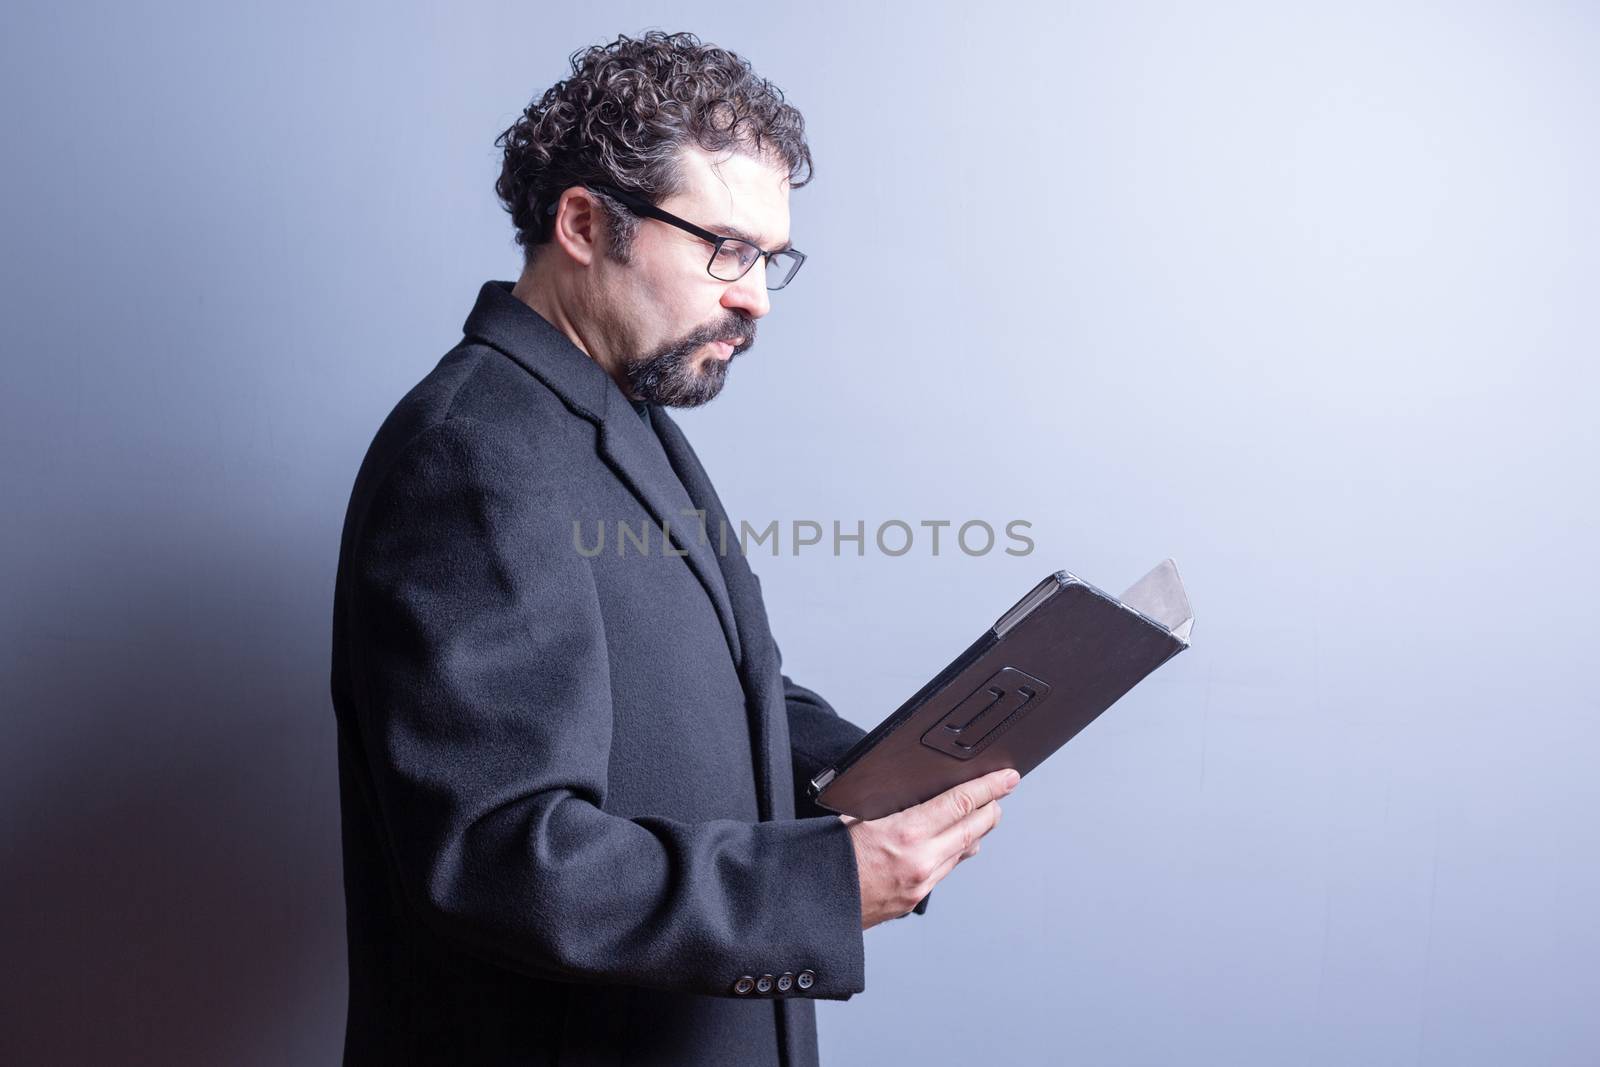 Waist Up of Business Man Wearing Suit Jacket and Eyeglasses Looking Serious While Reading Computer Tablet in Studio with Gray Background and Copy Space